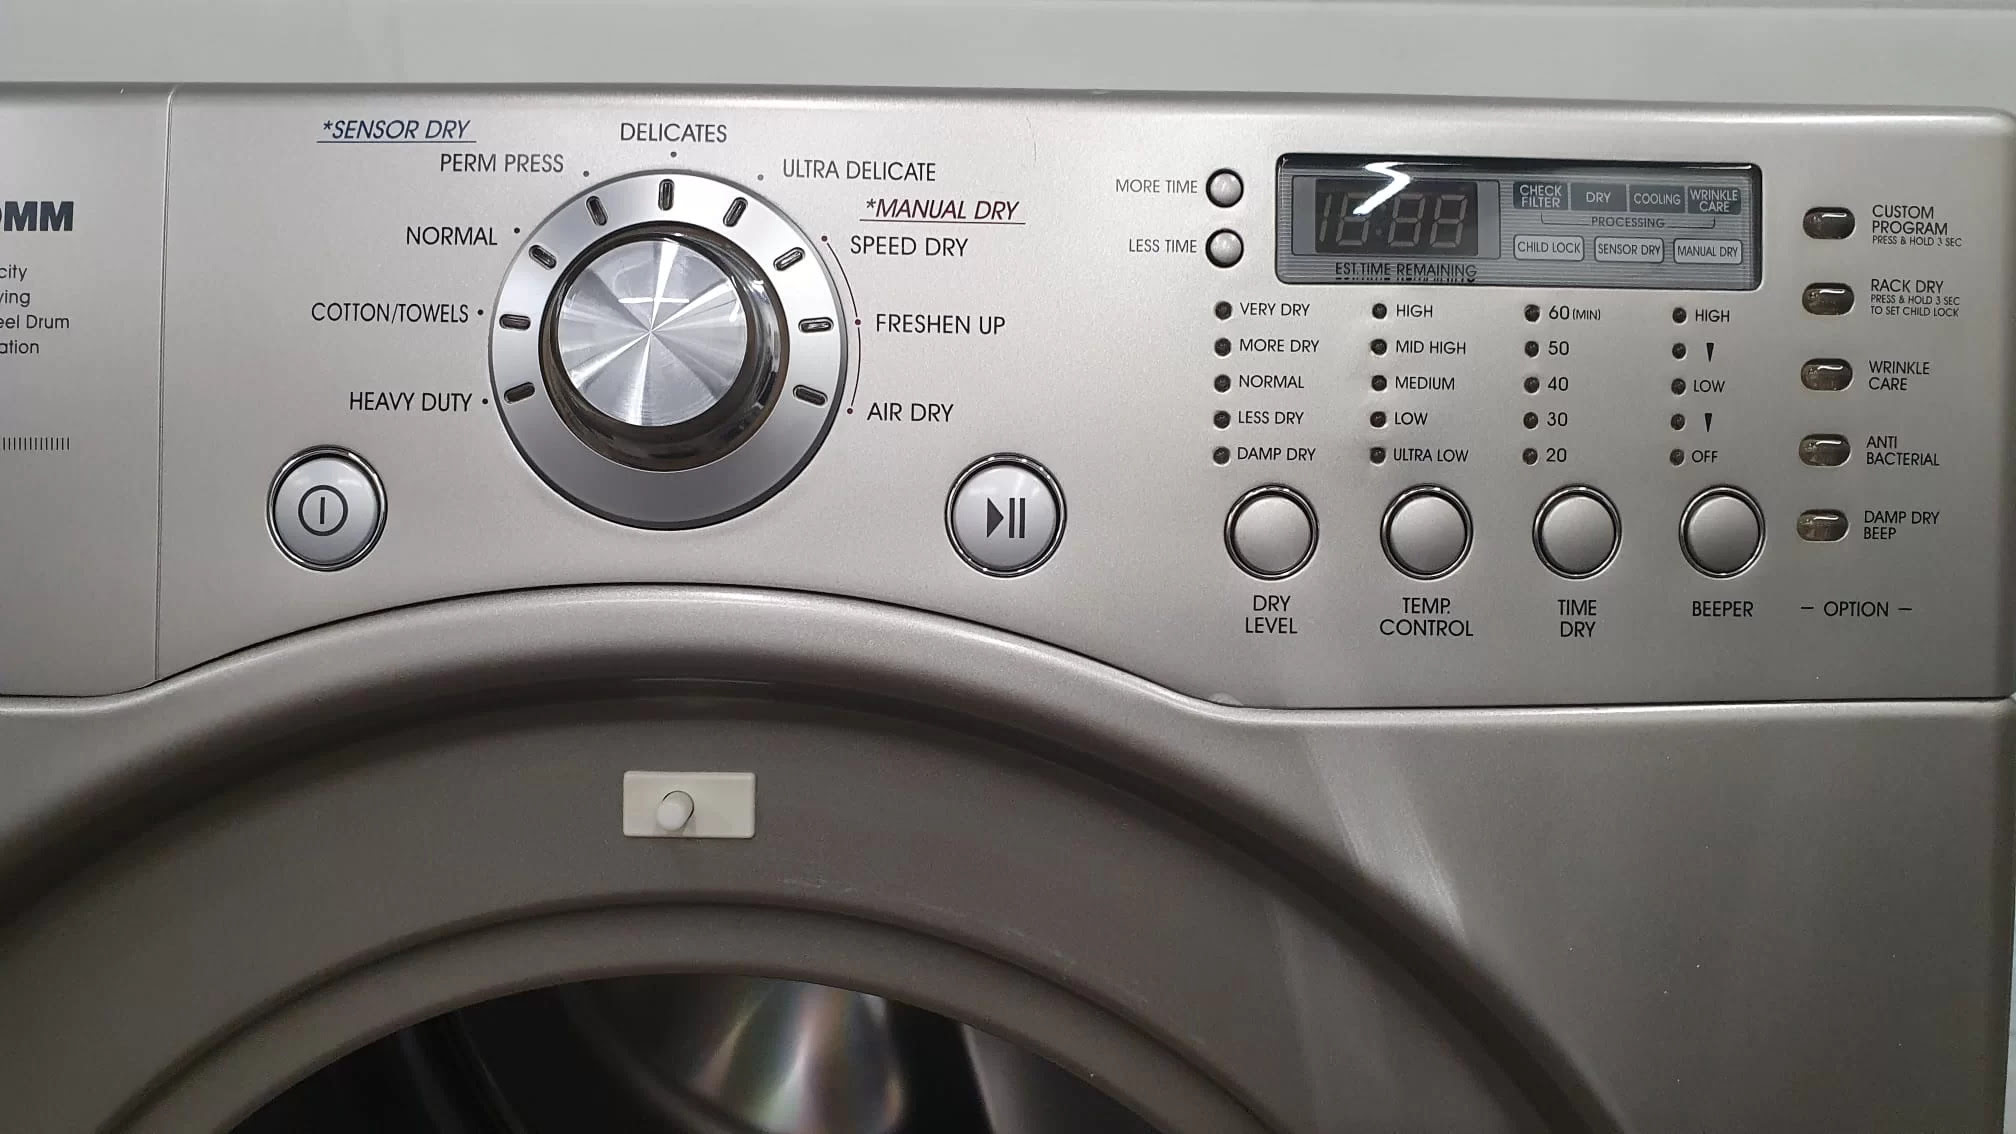 How To Fix The Error Code BE For LG Dryer